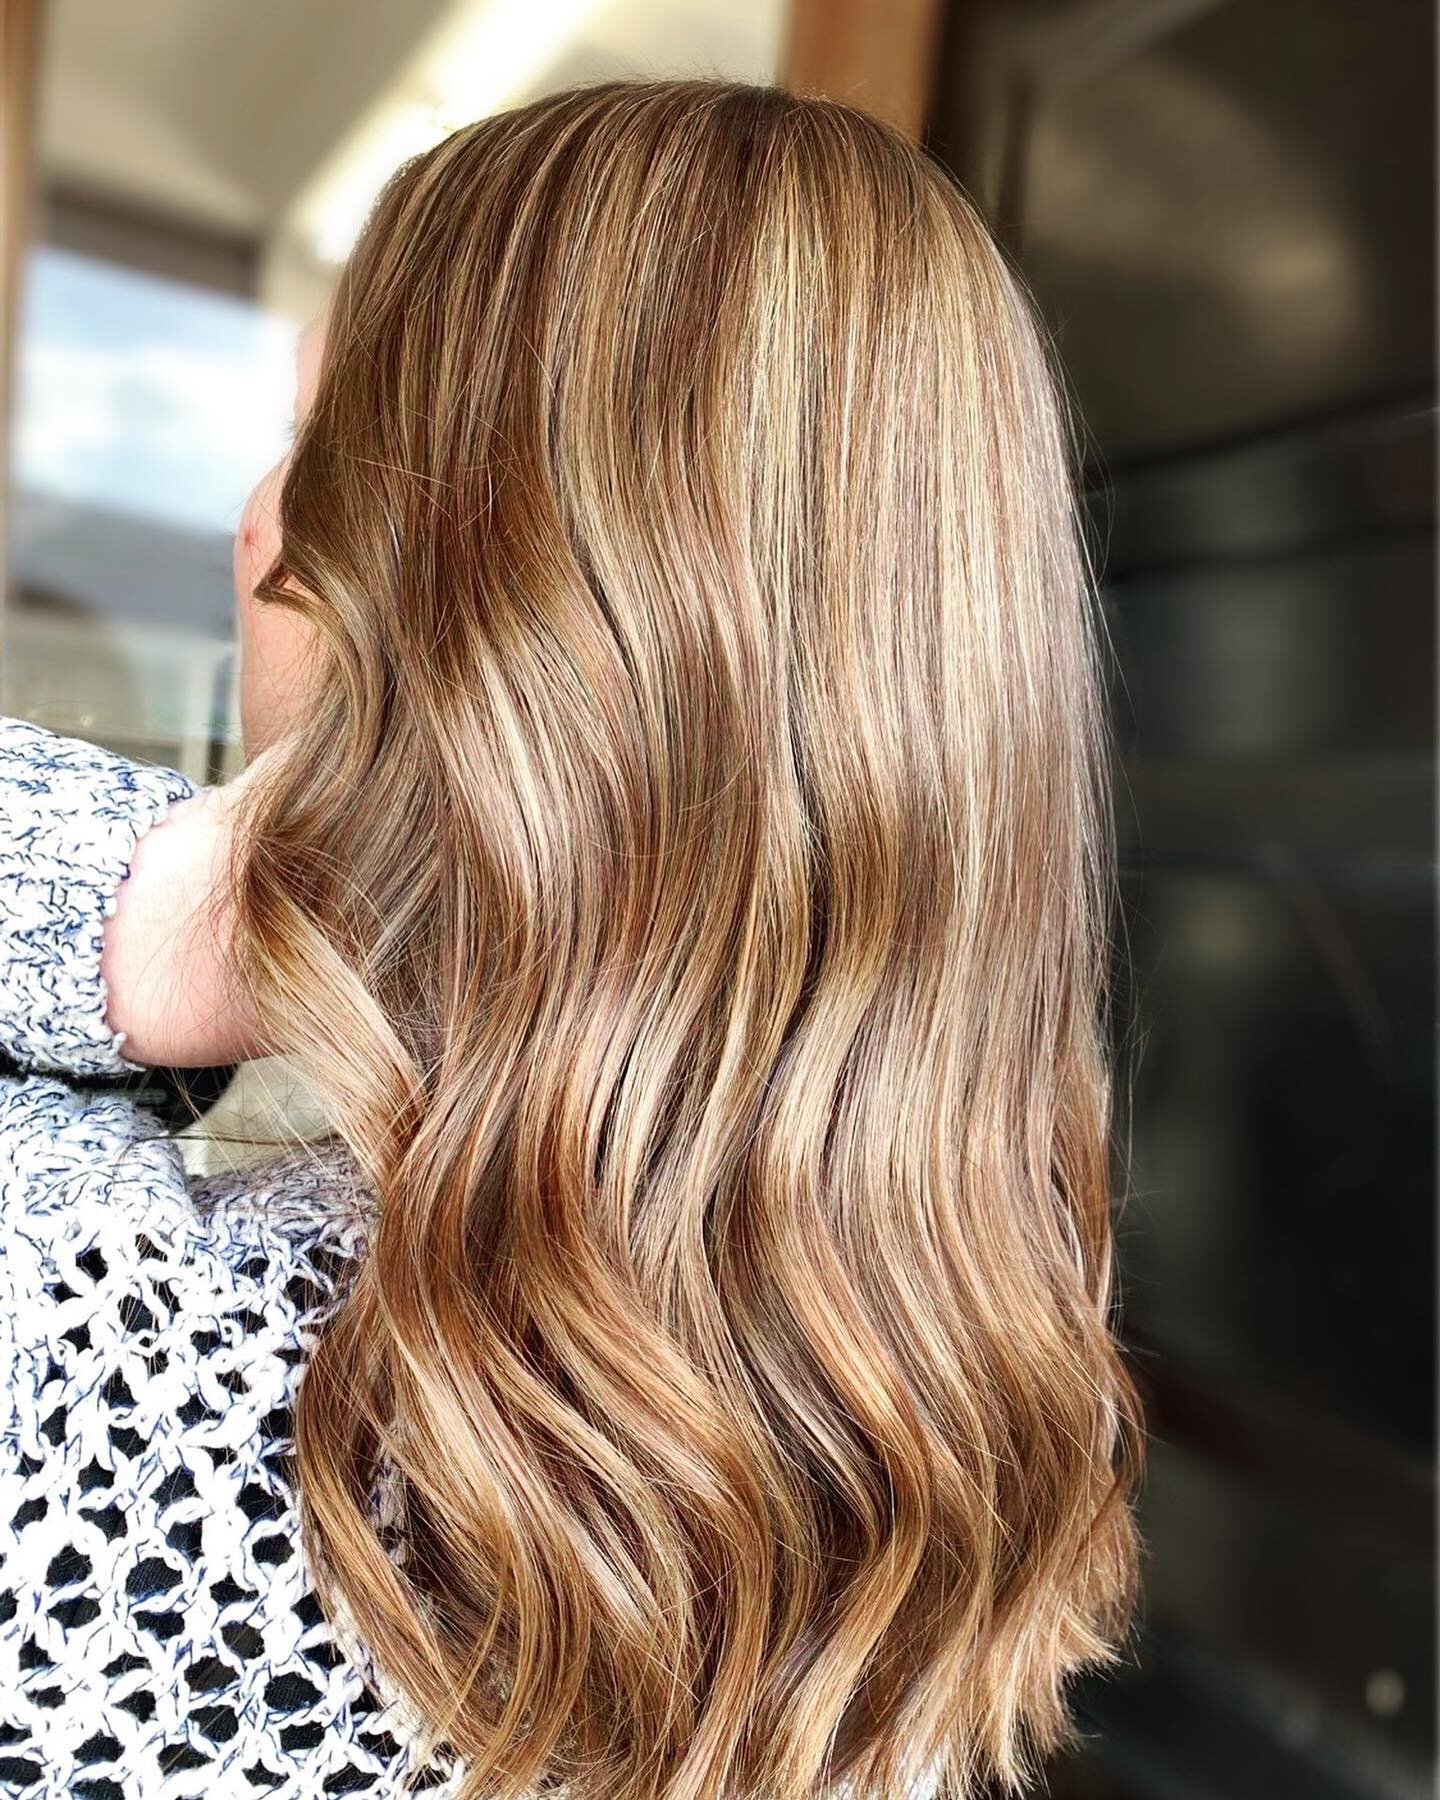 auburn feels💗

How stunning is this lil masterpiece! Let&rsquo;s do something different t for winter&hellip; contact us to book! 
.⁣
.⁣
.⁣ @elyse_lavilla 
.⁣
.⁣ 
#hairgoals #blondehair #balayageombre #showmethebalayage #highlights #blondespecialist 